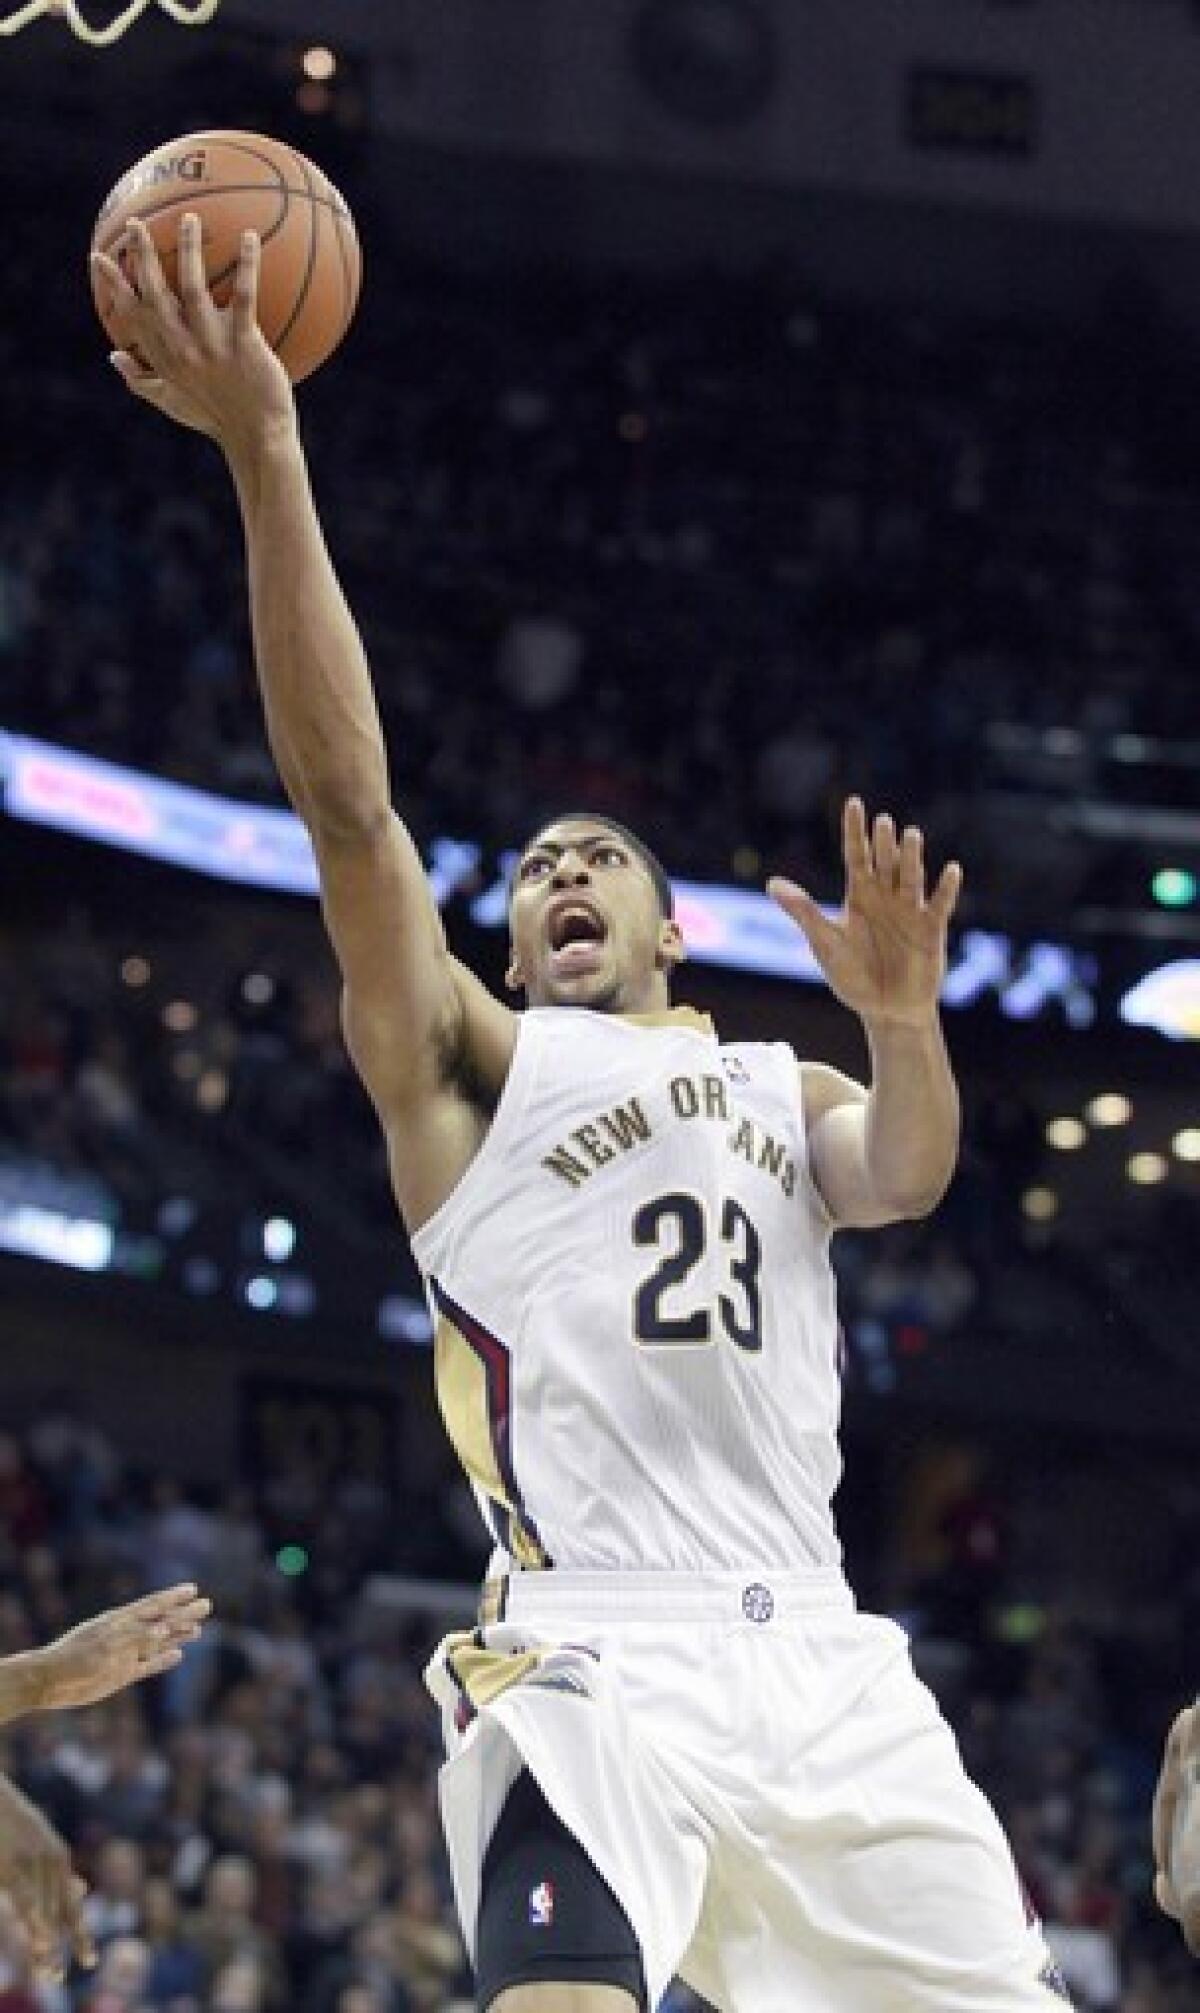 New Orleans Pelicans forward Anthony Davis, scoring against the Lakers in a November 2013 game, will take Kobe Bryant's place on the Western Conference All-Star team.